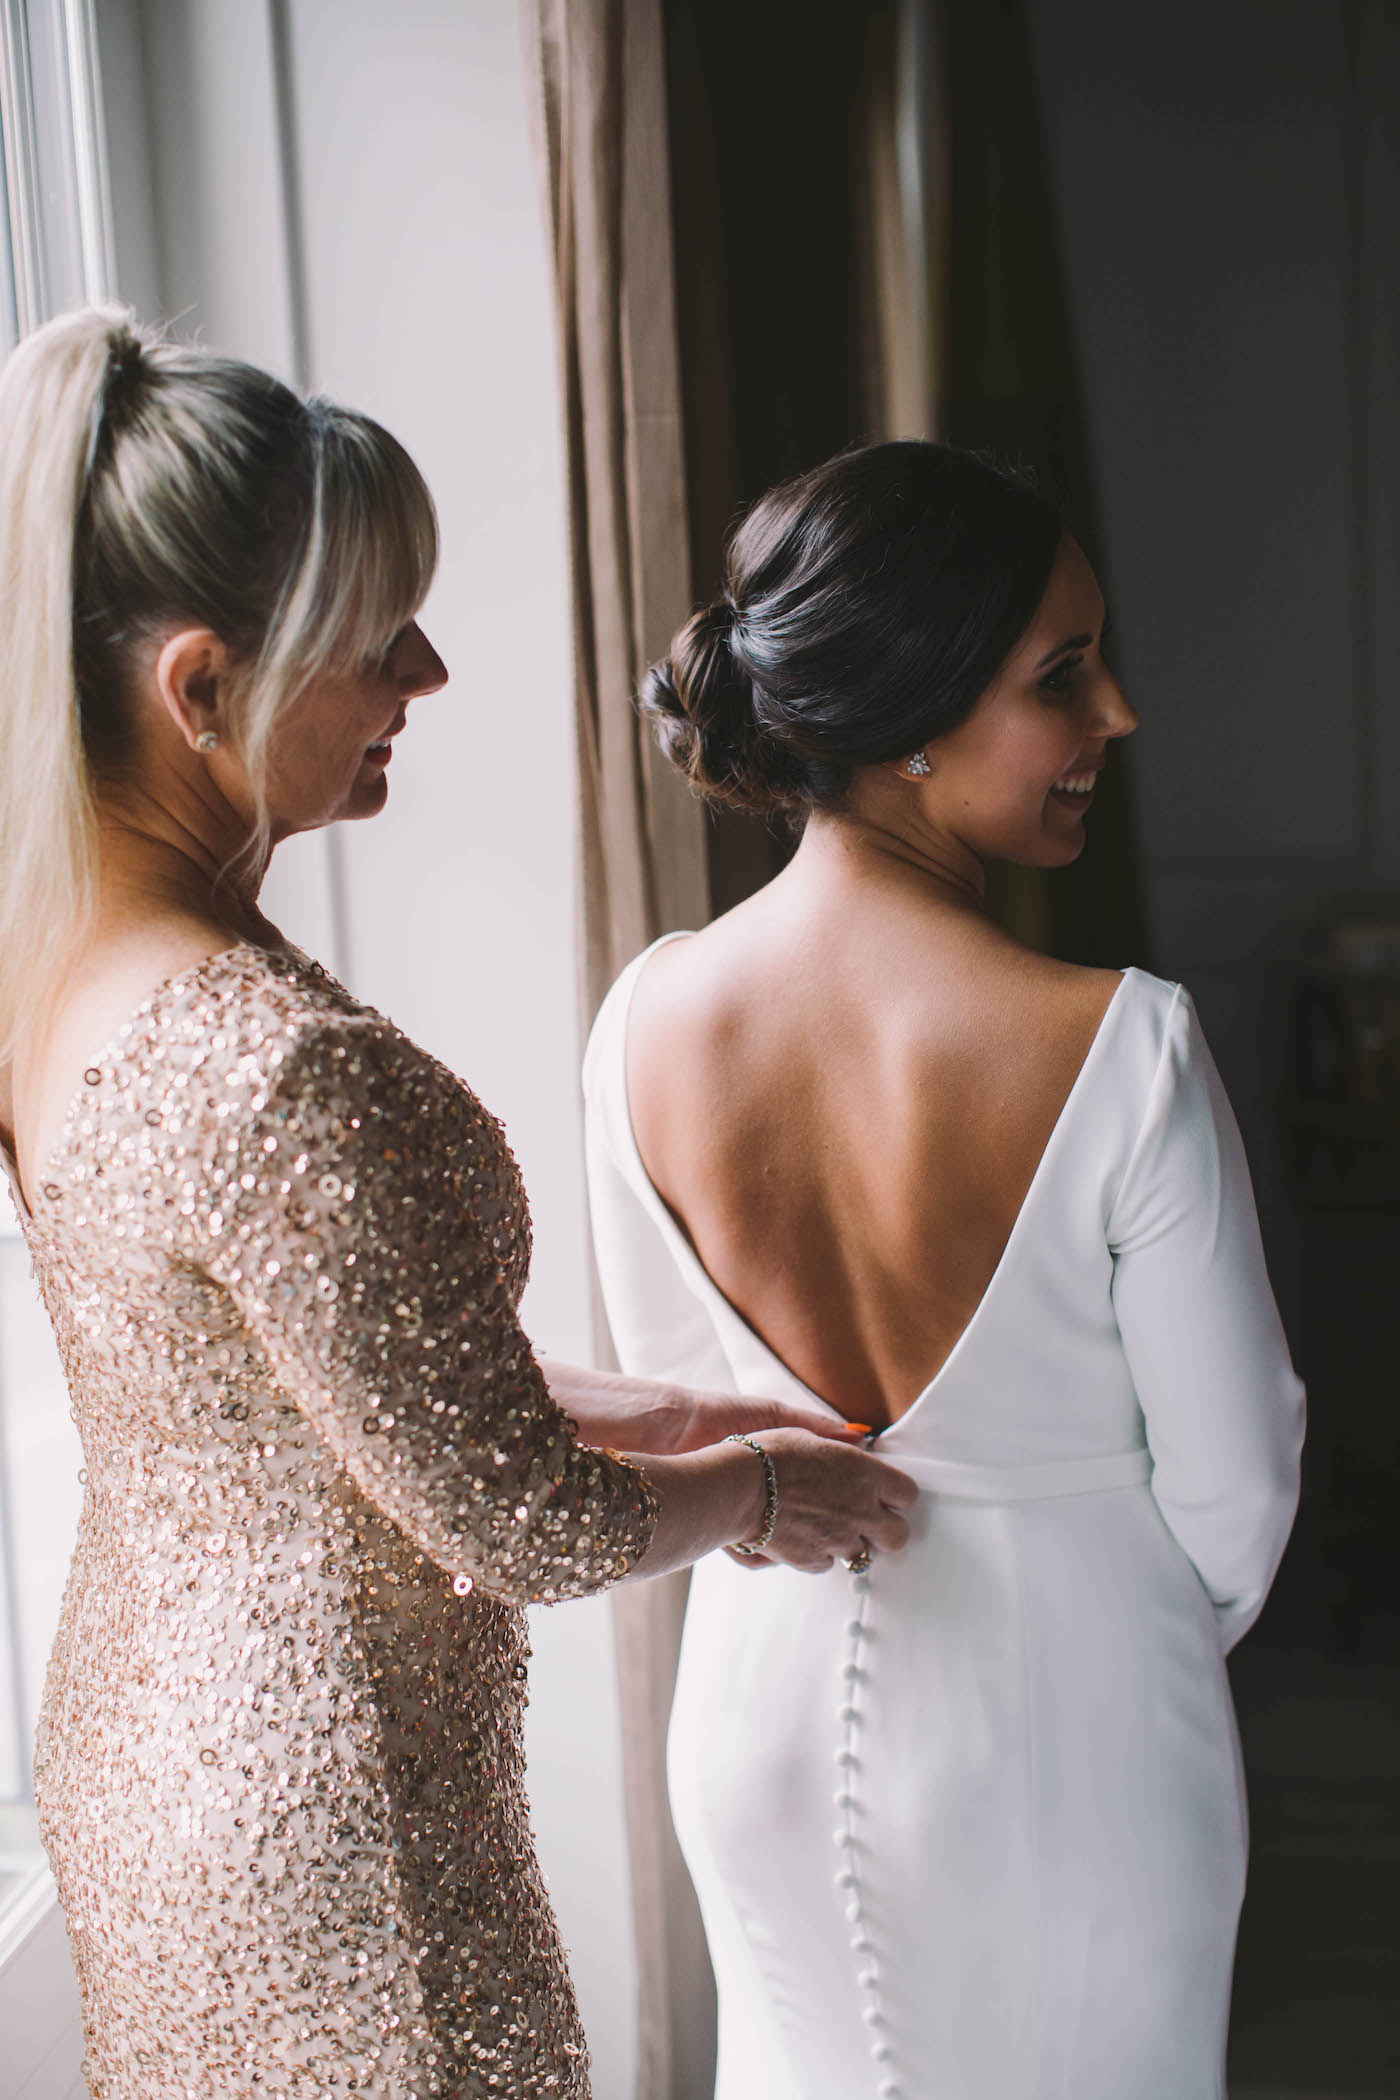 Timeless Florida Bride and Mother Getting Ready Portrait | Bride Wearing White Mikaella Bridal Wedding Dress with Open V-Back and Buttons, Long Sleeves | Tampa Bay Boutique Hotel Wedding Venue The Birchwood